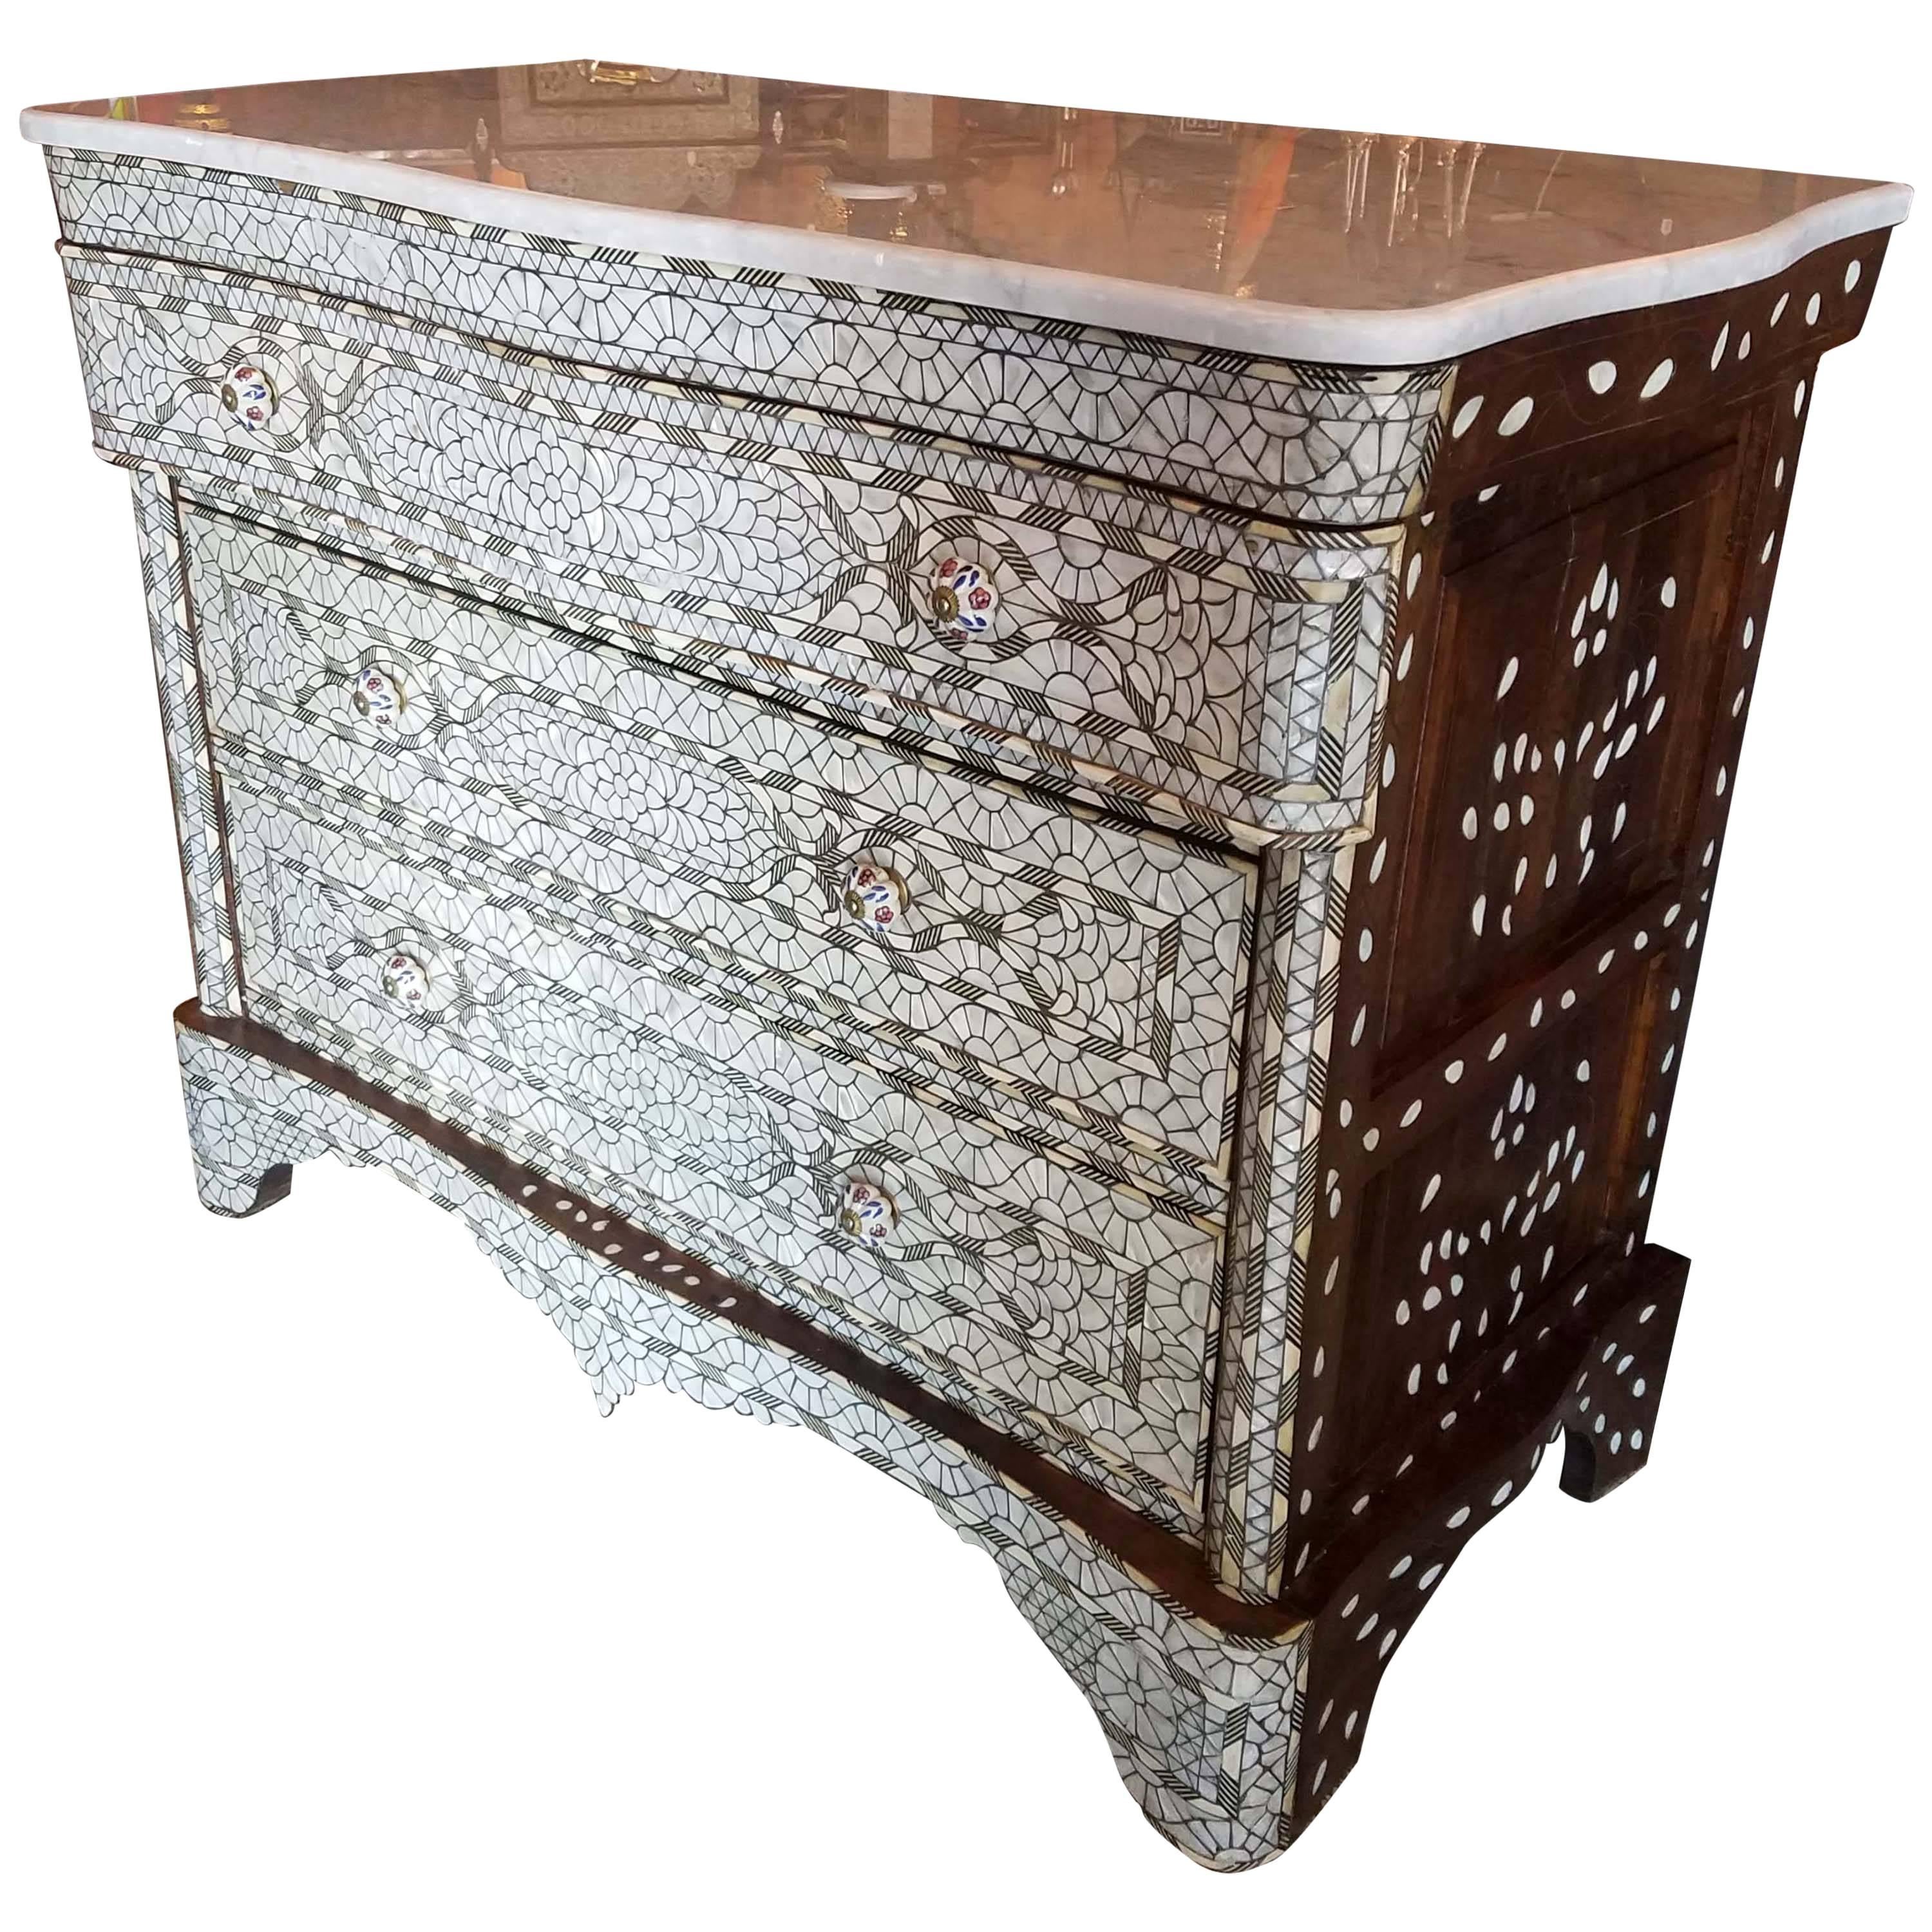 Large Syrian Mother-of-Pearl Walnut Wood Chest of Drawers, Ivory color. For Sale